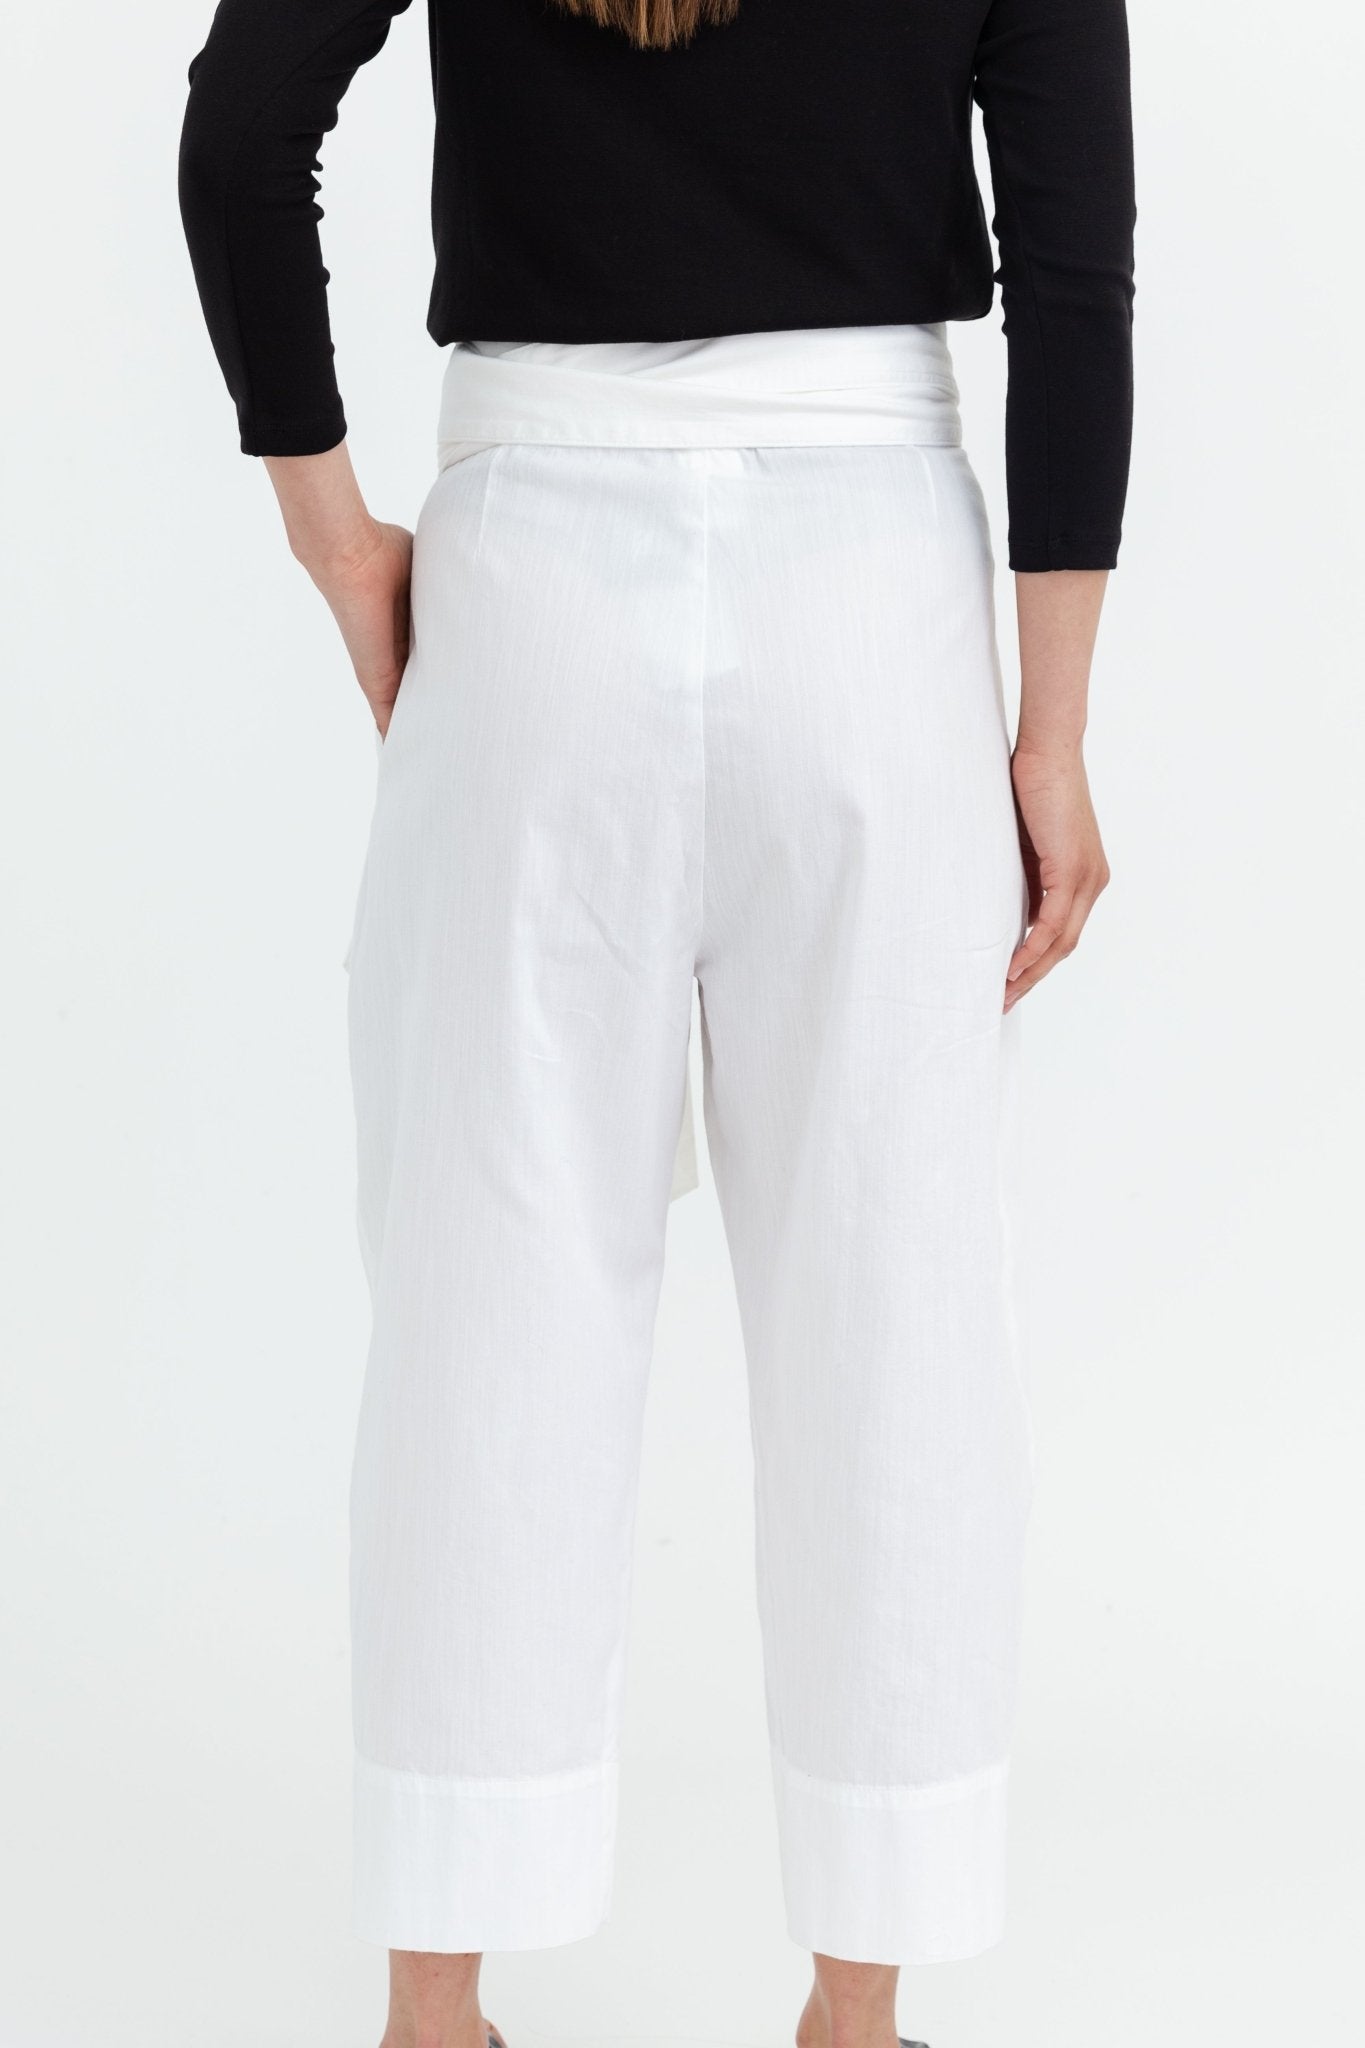 TIE PANT IN SOFT GARMENT DYED COTTON - Jarbo